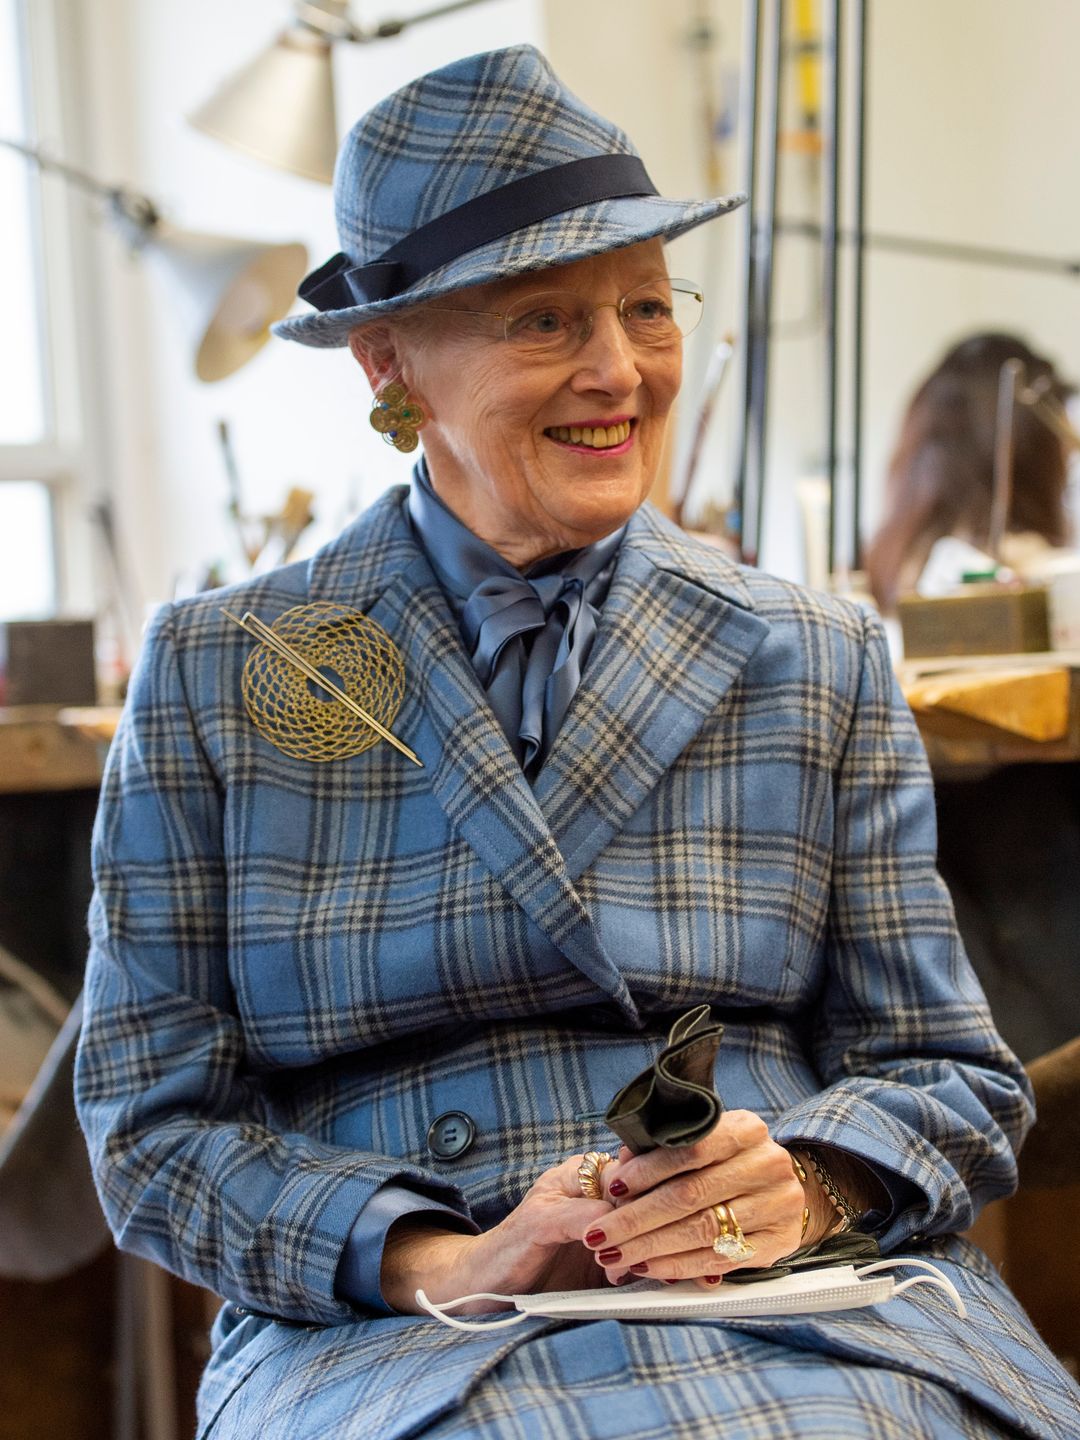 Queen Margrethe II of Denmark wears a matching blue plaid suit to attend a jewellery workshop in Munich 